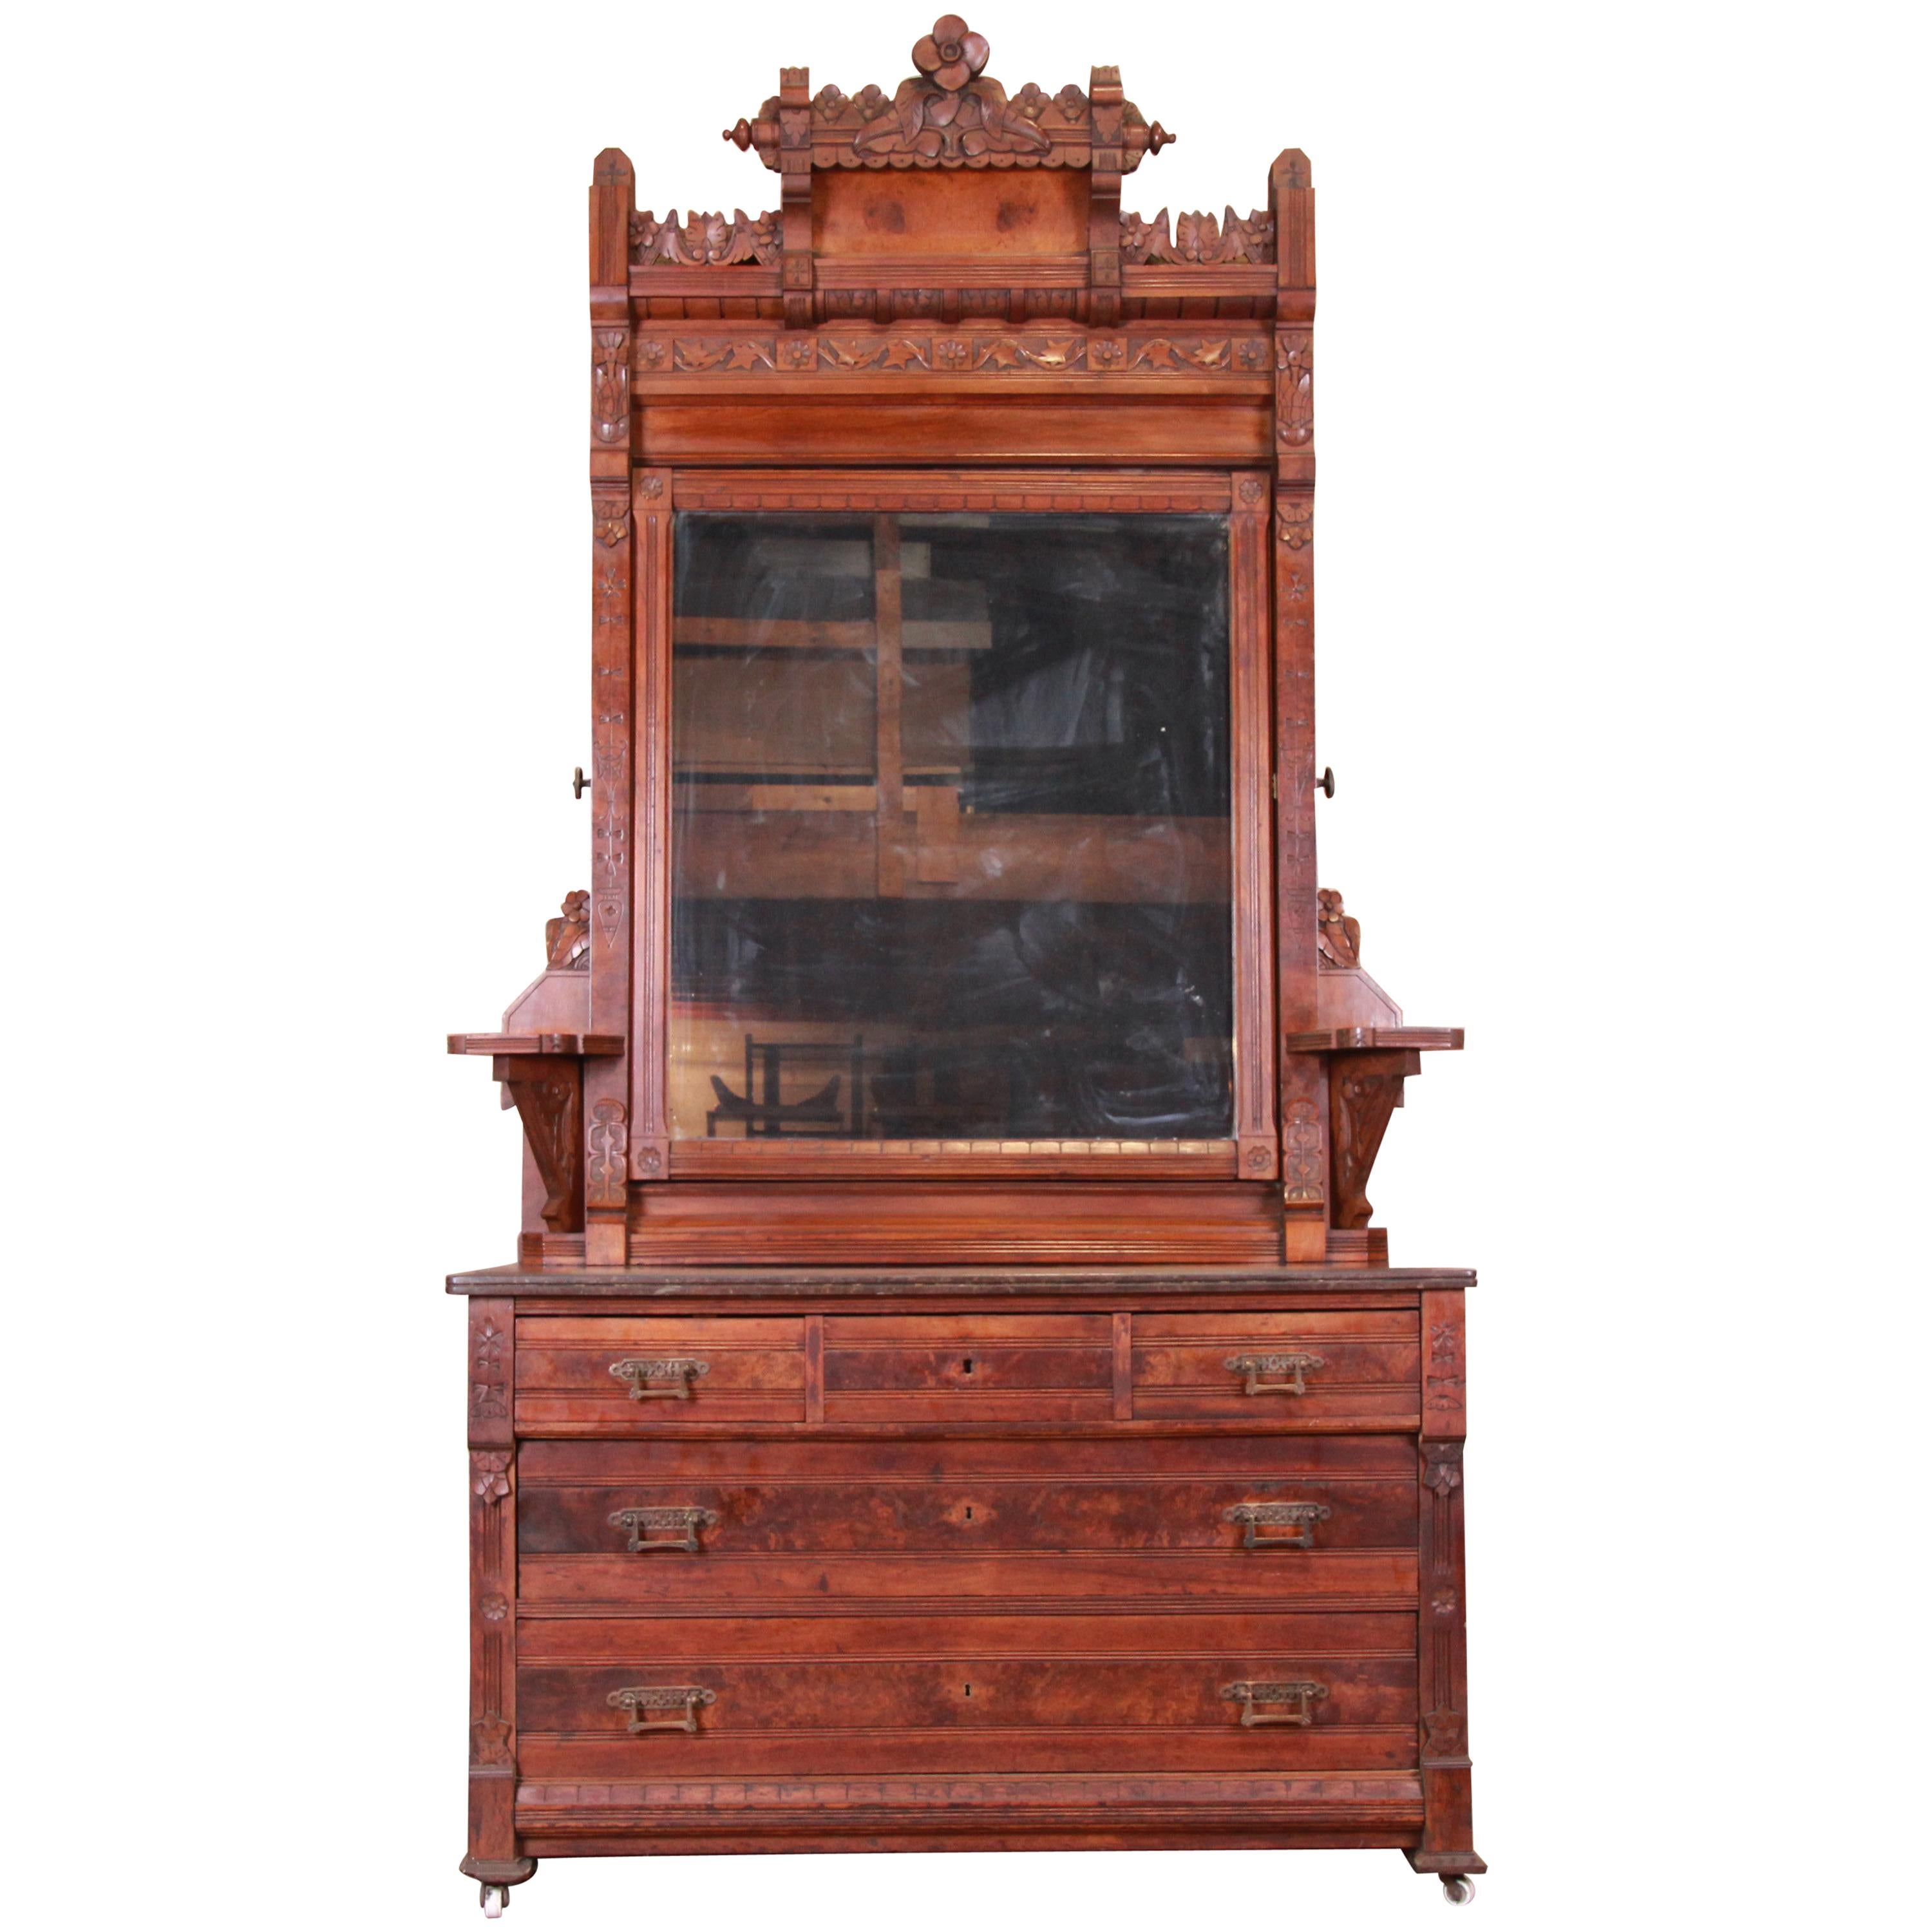 Monumental Eastlake Victorian Carved Walnut and Burl Wood Dresser with Mirror